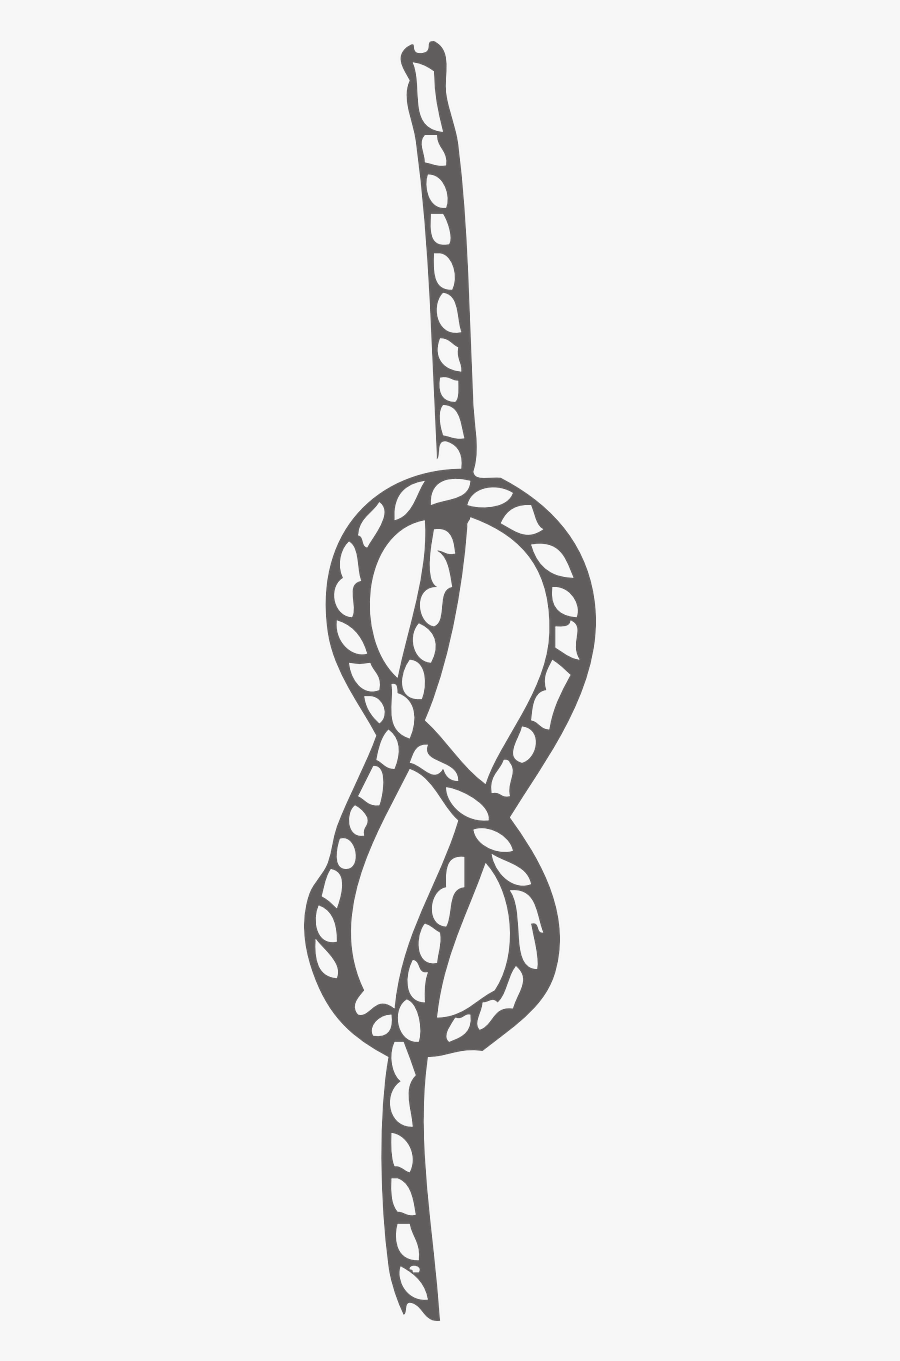 Knot Figure Eight Rope - Rope Knot Transparent Clipart, Transparent Clipart